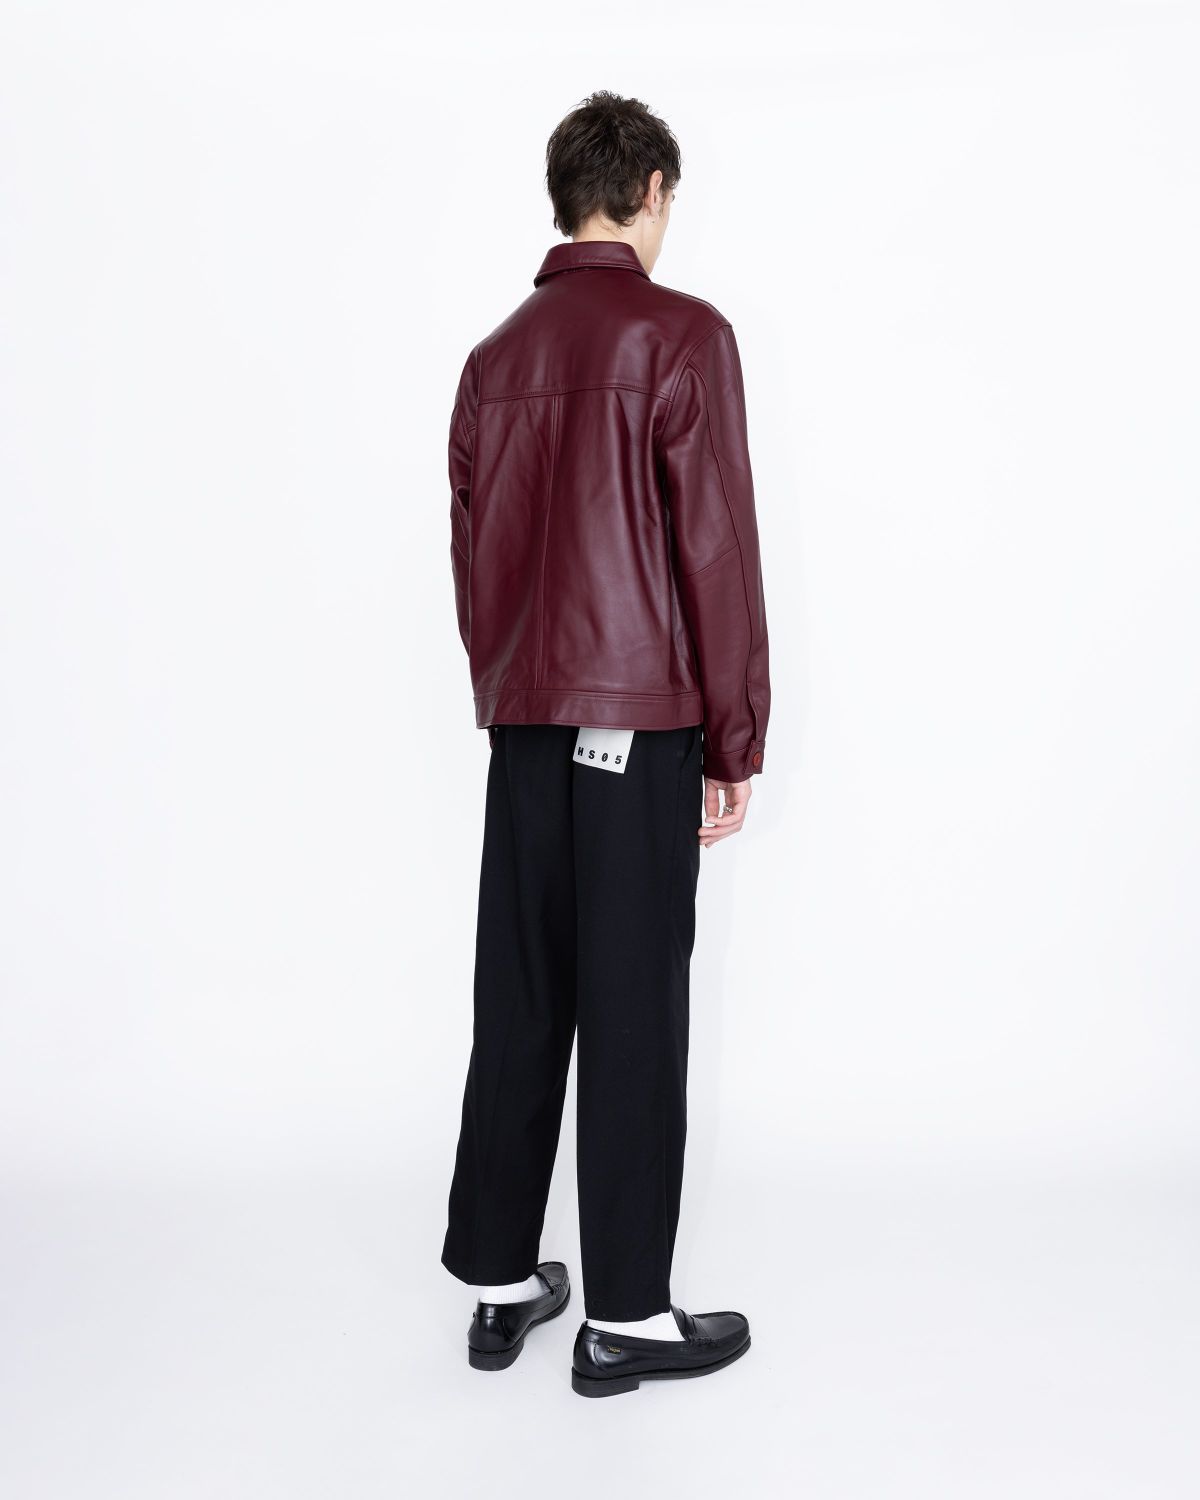 Highsnobiety HS05 – Leather Jacket Burgundy - Outerwear - Red - Image 5